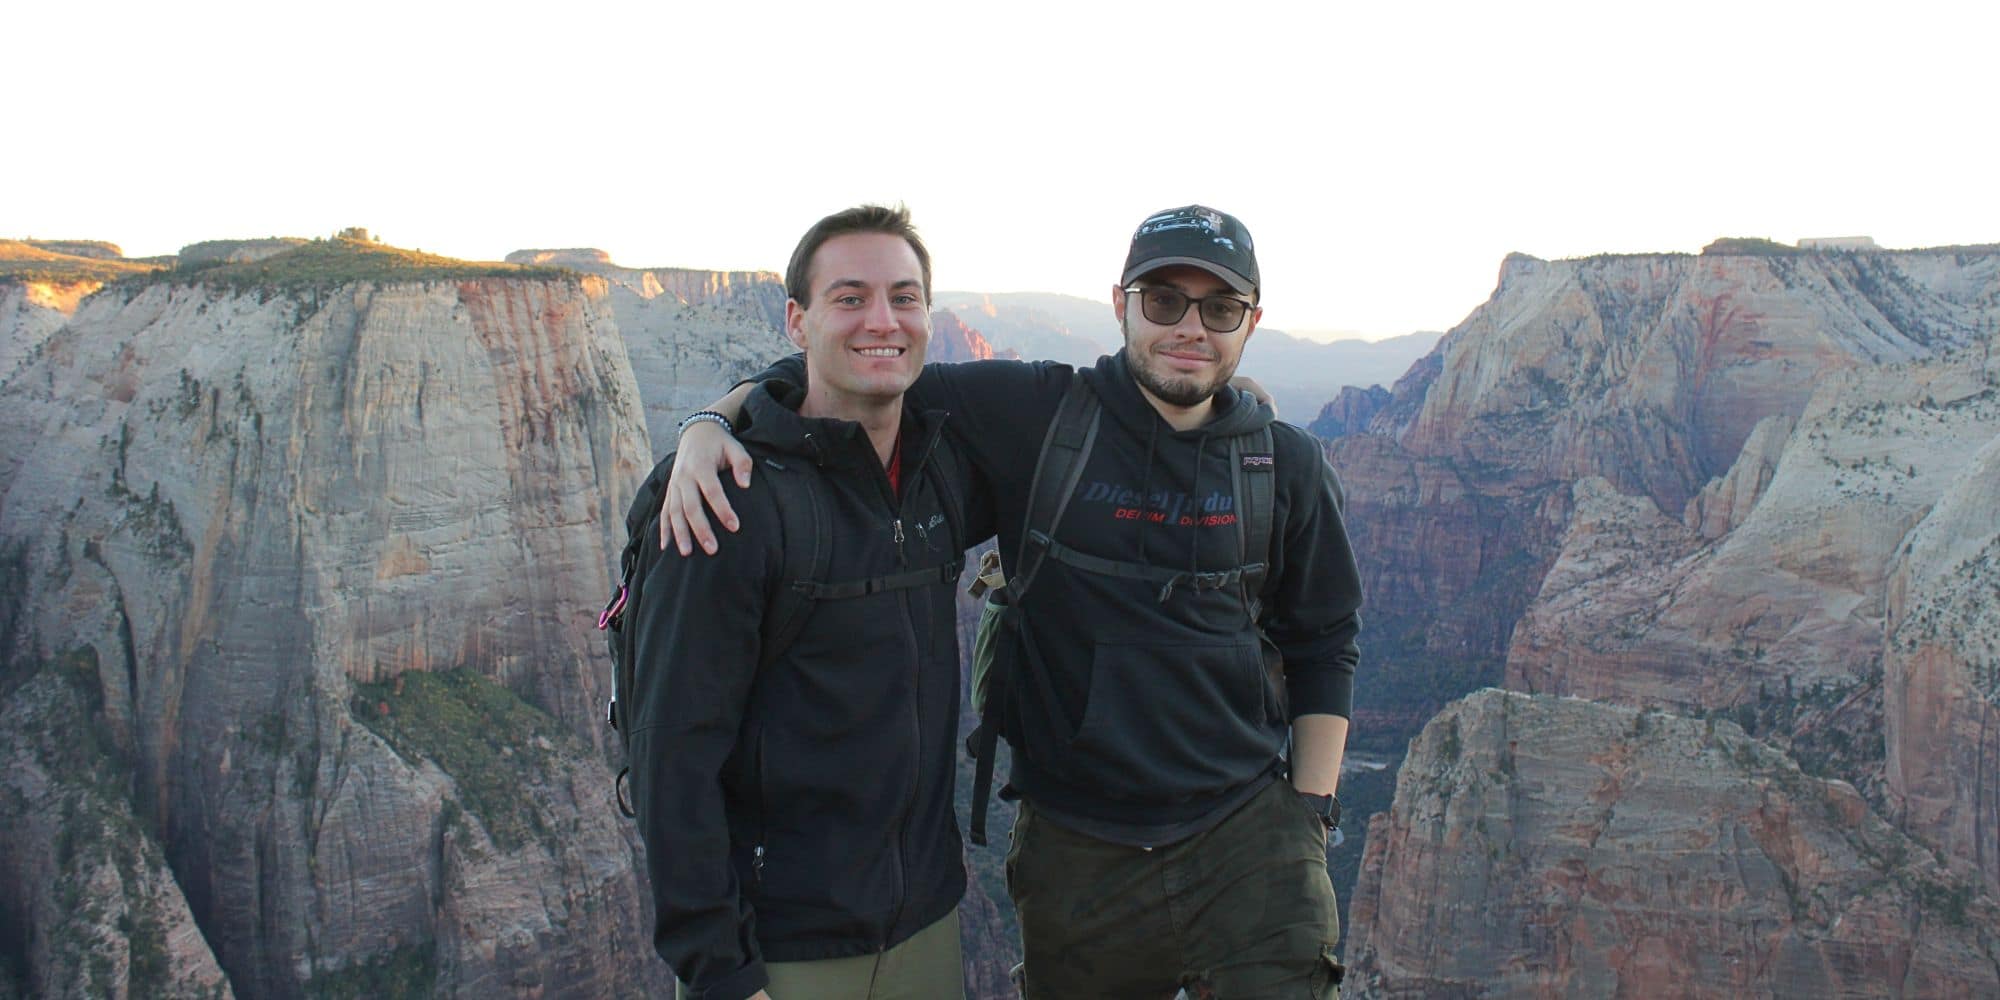 B.S. in Aerospace Engineering major Tanner Whitney enjoys the outdoor setting of the Prescott, Arizona campus and enjoys a hike with his fellow student Natale Cannas.